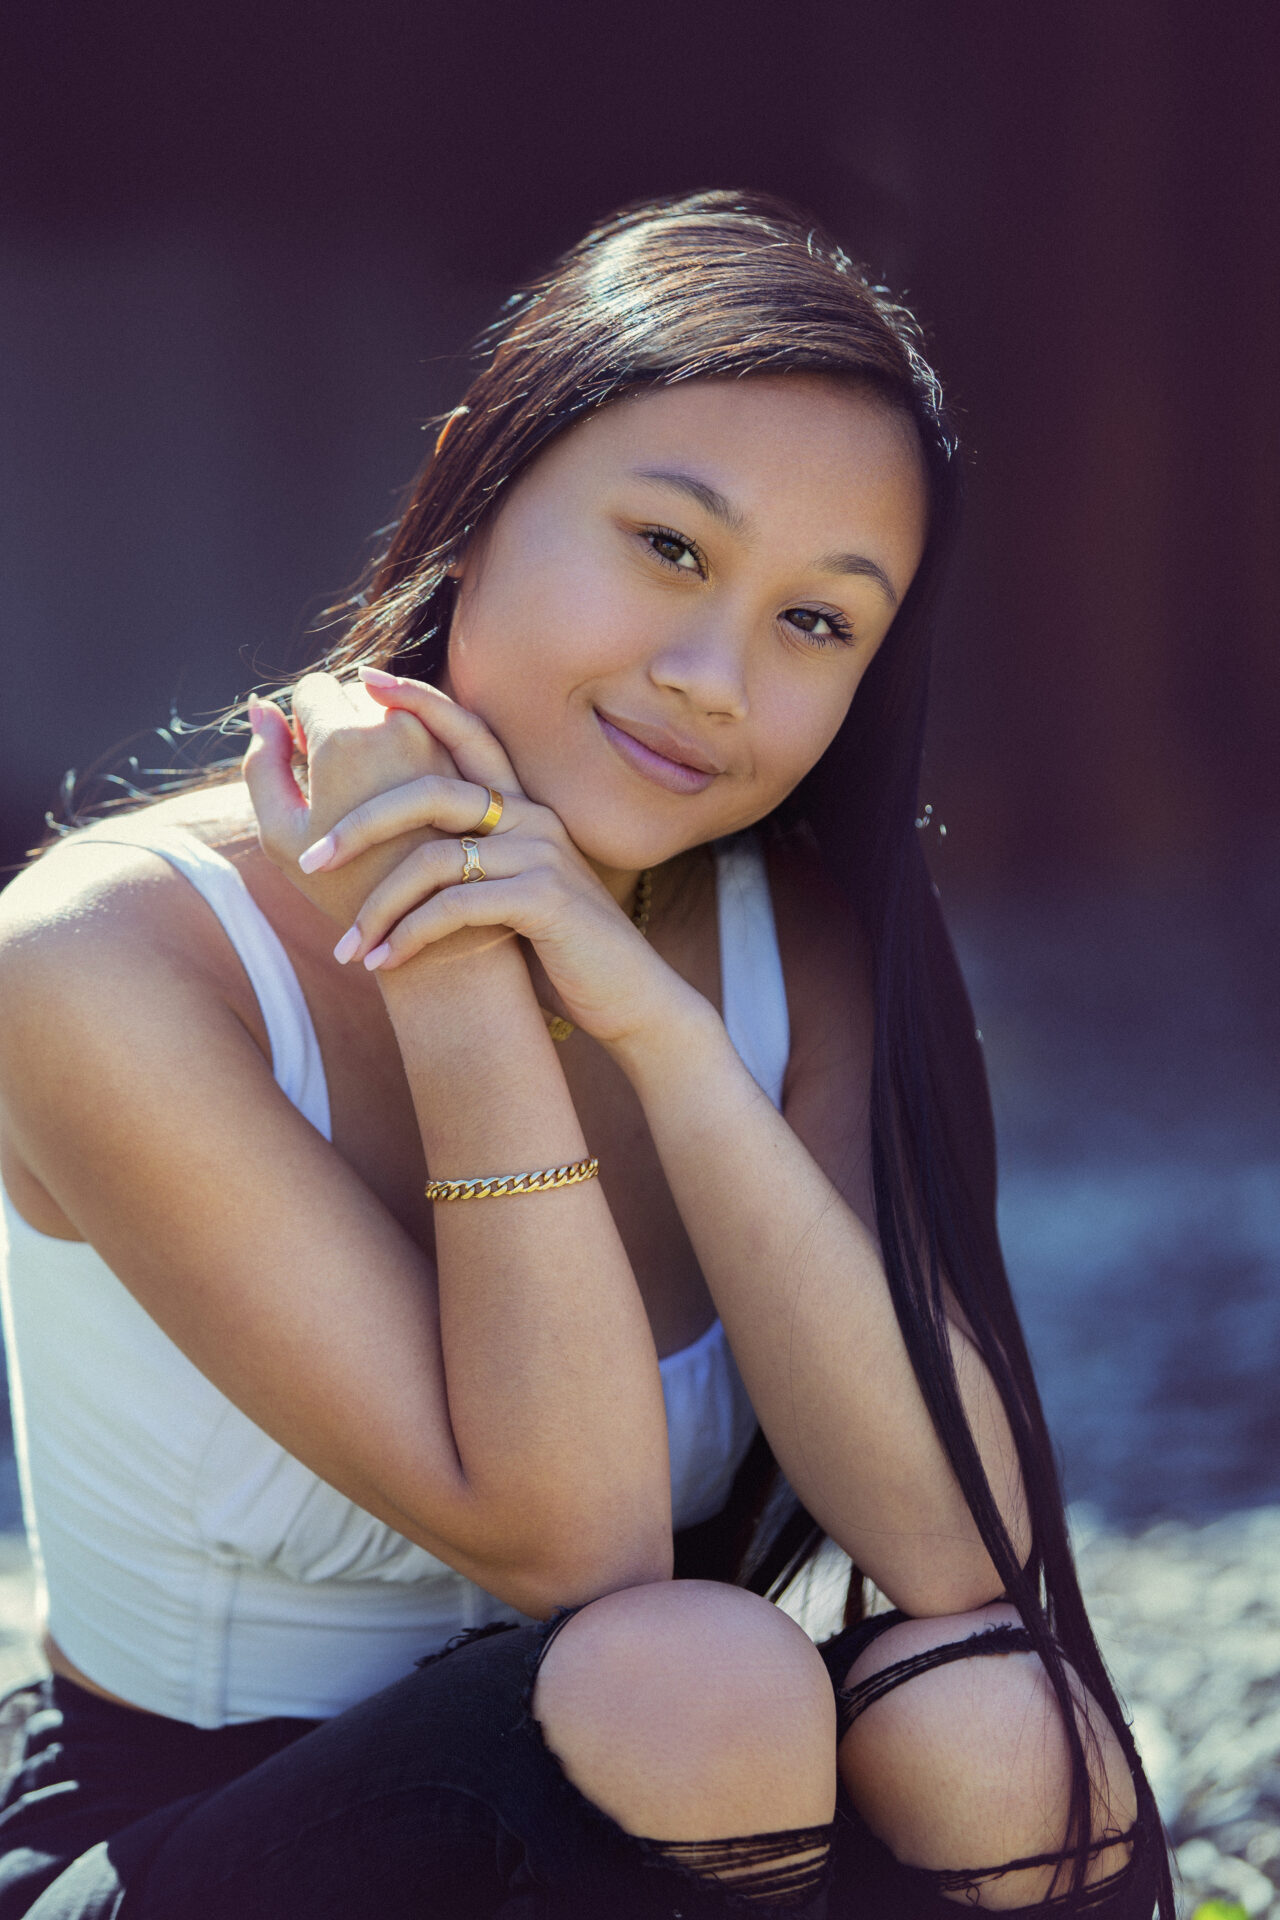 High school senior portrait of a young woman by Astrapia Photography